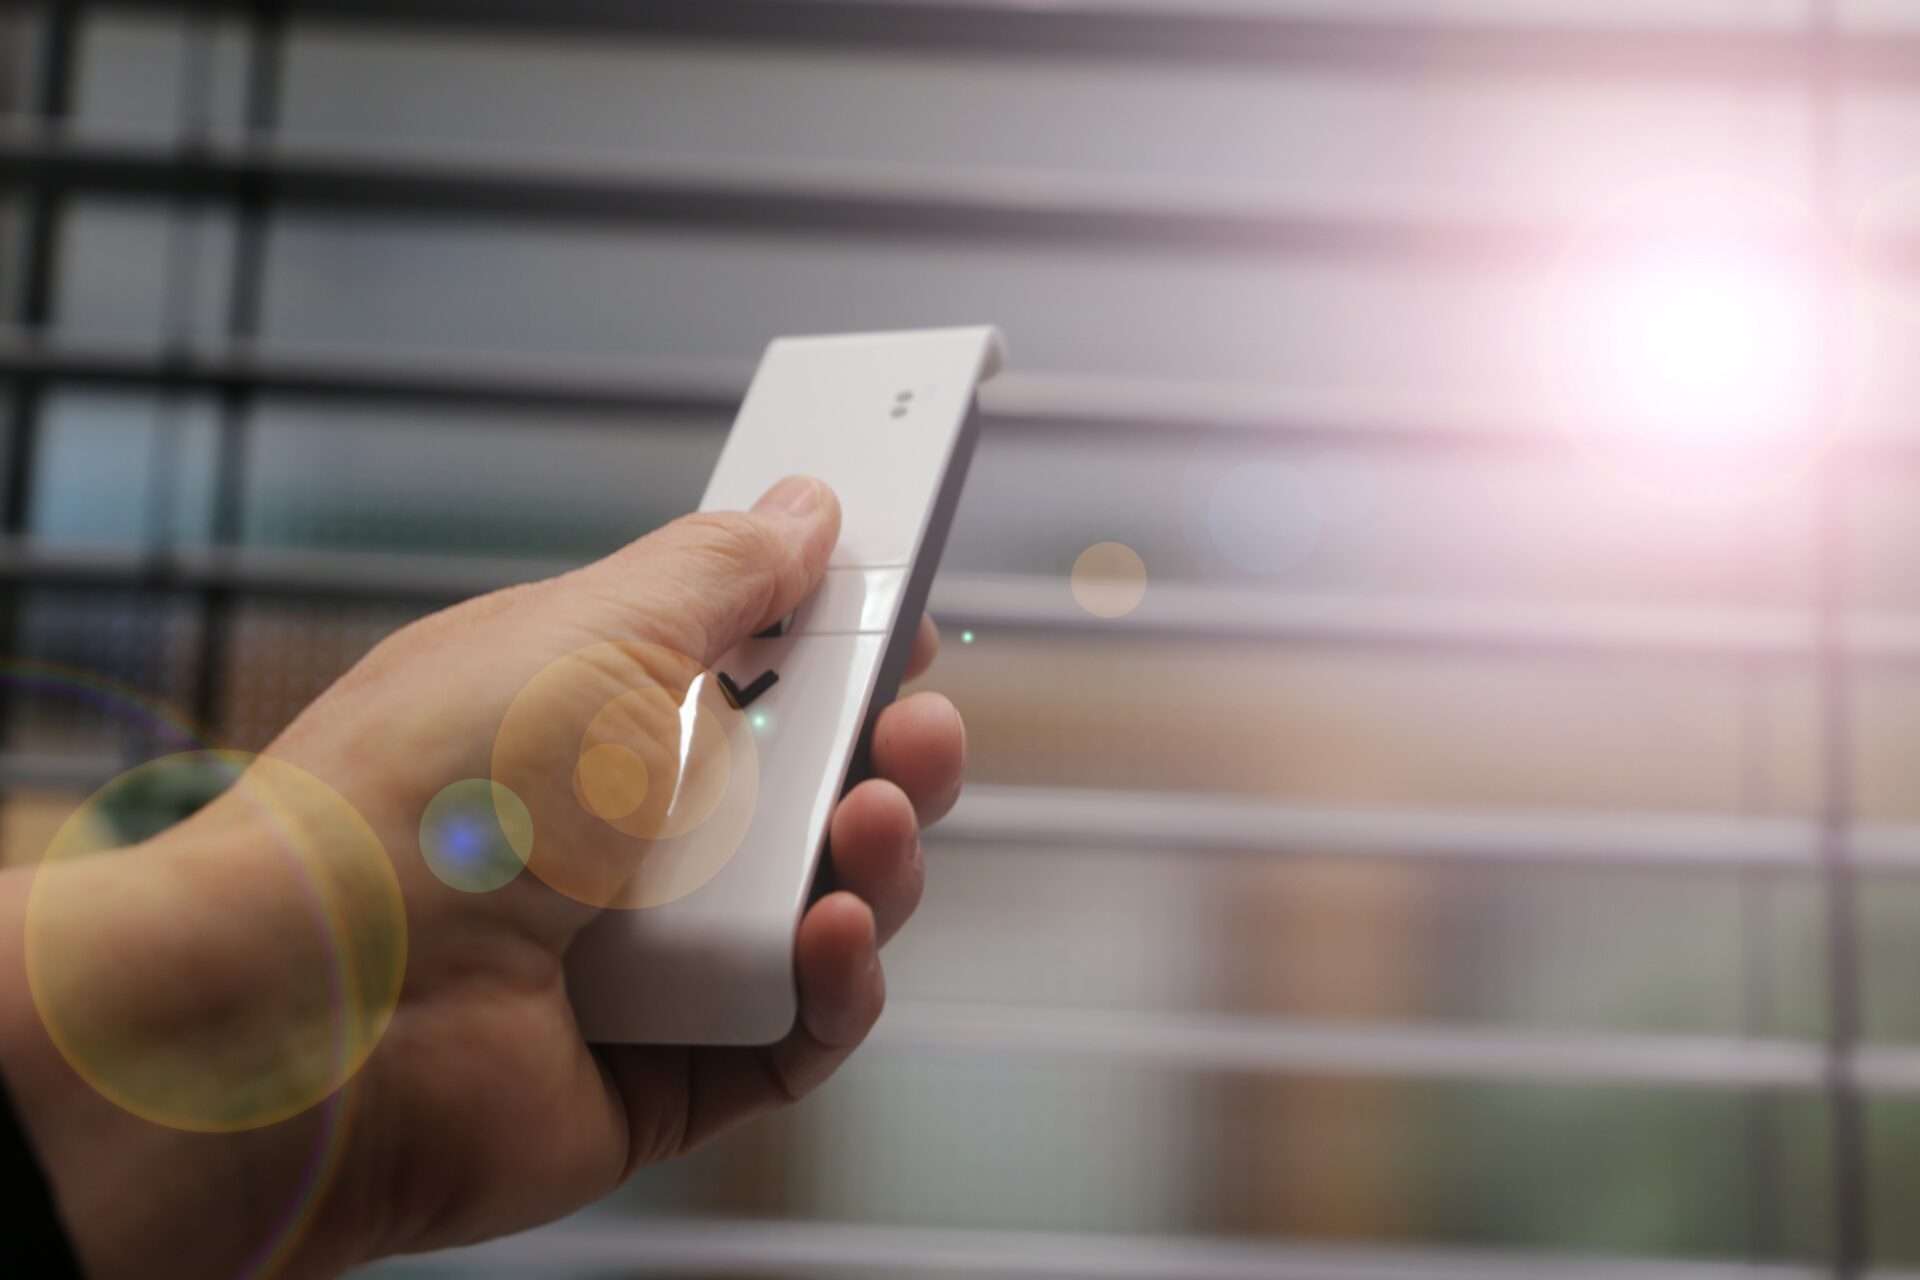 Motorized blinds controlled by white remote